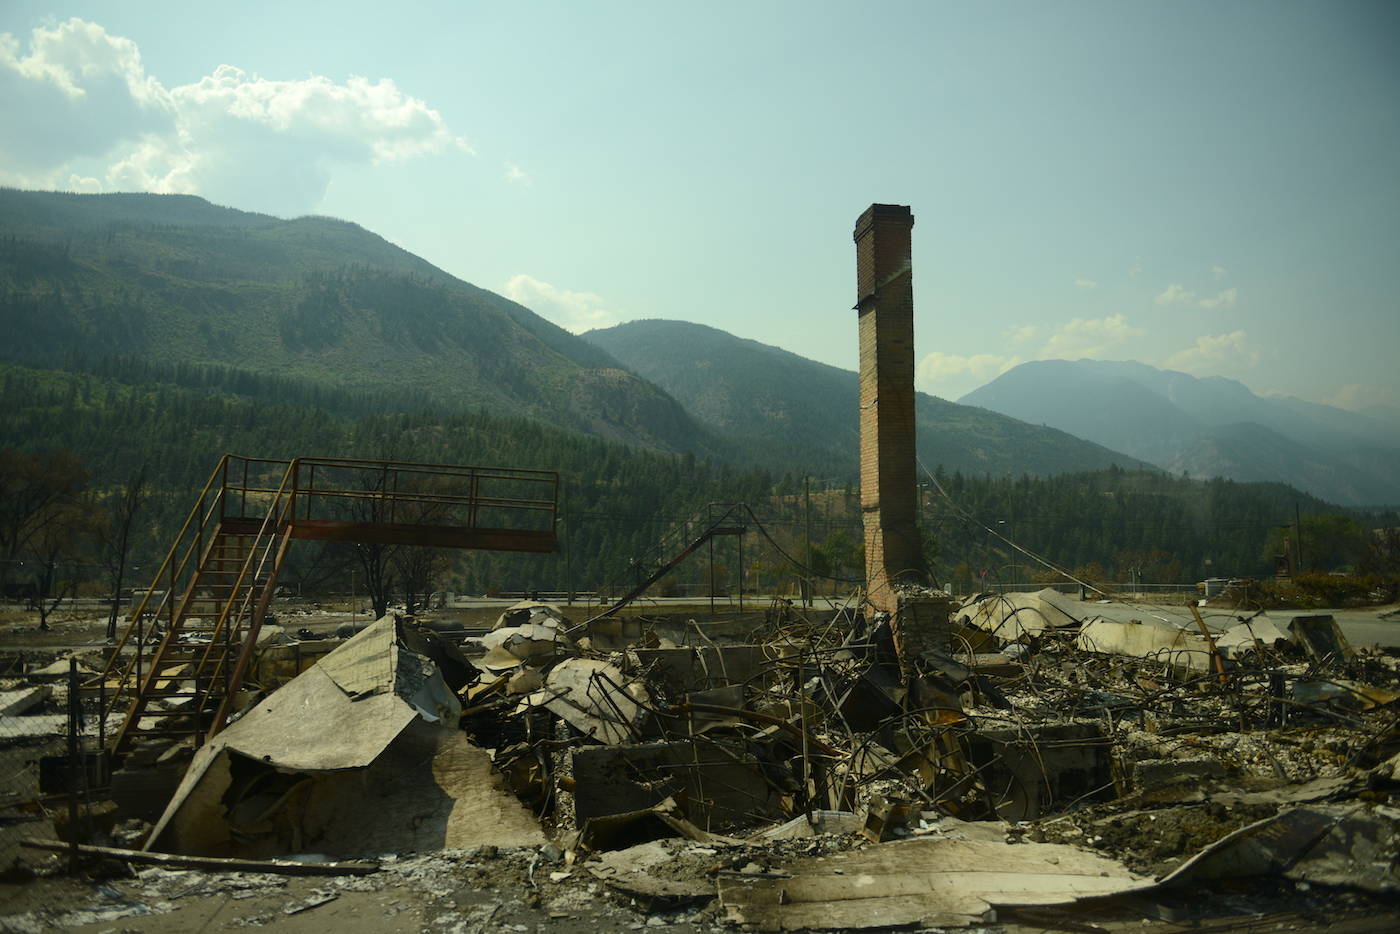 A chimney stands amid debris in Lytton, B.C. on Friday, July 9, 2021, nine days after a wildfire ripped through the village on June 30, 2021. (Jenna Hauck/ Black Press Media)